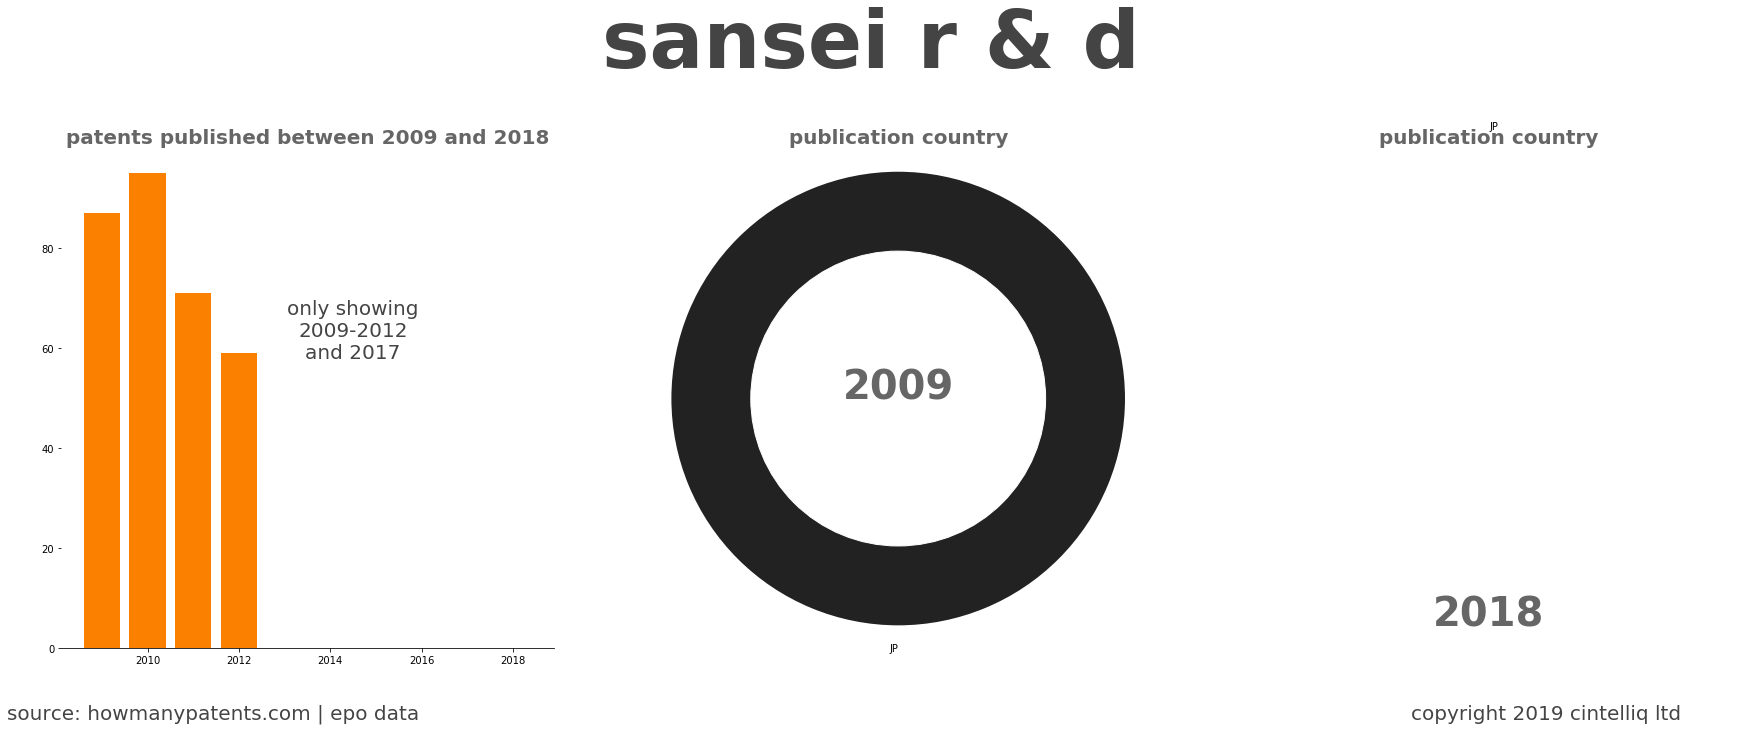 summary of patents for Sansei R & D